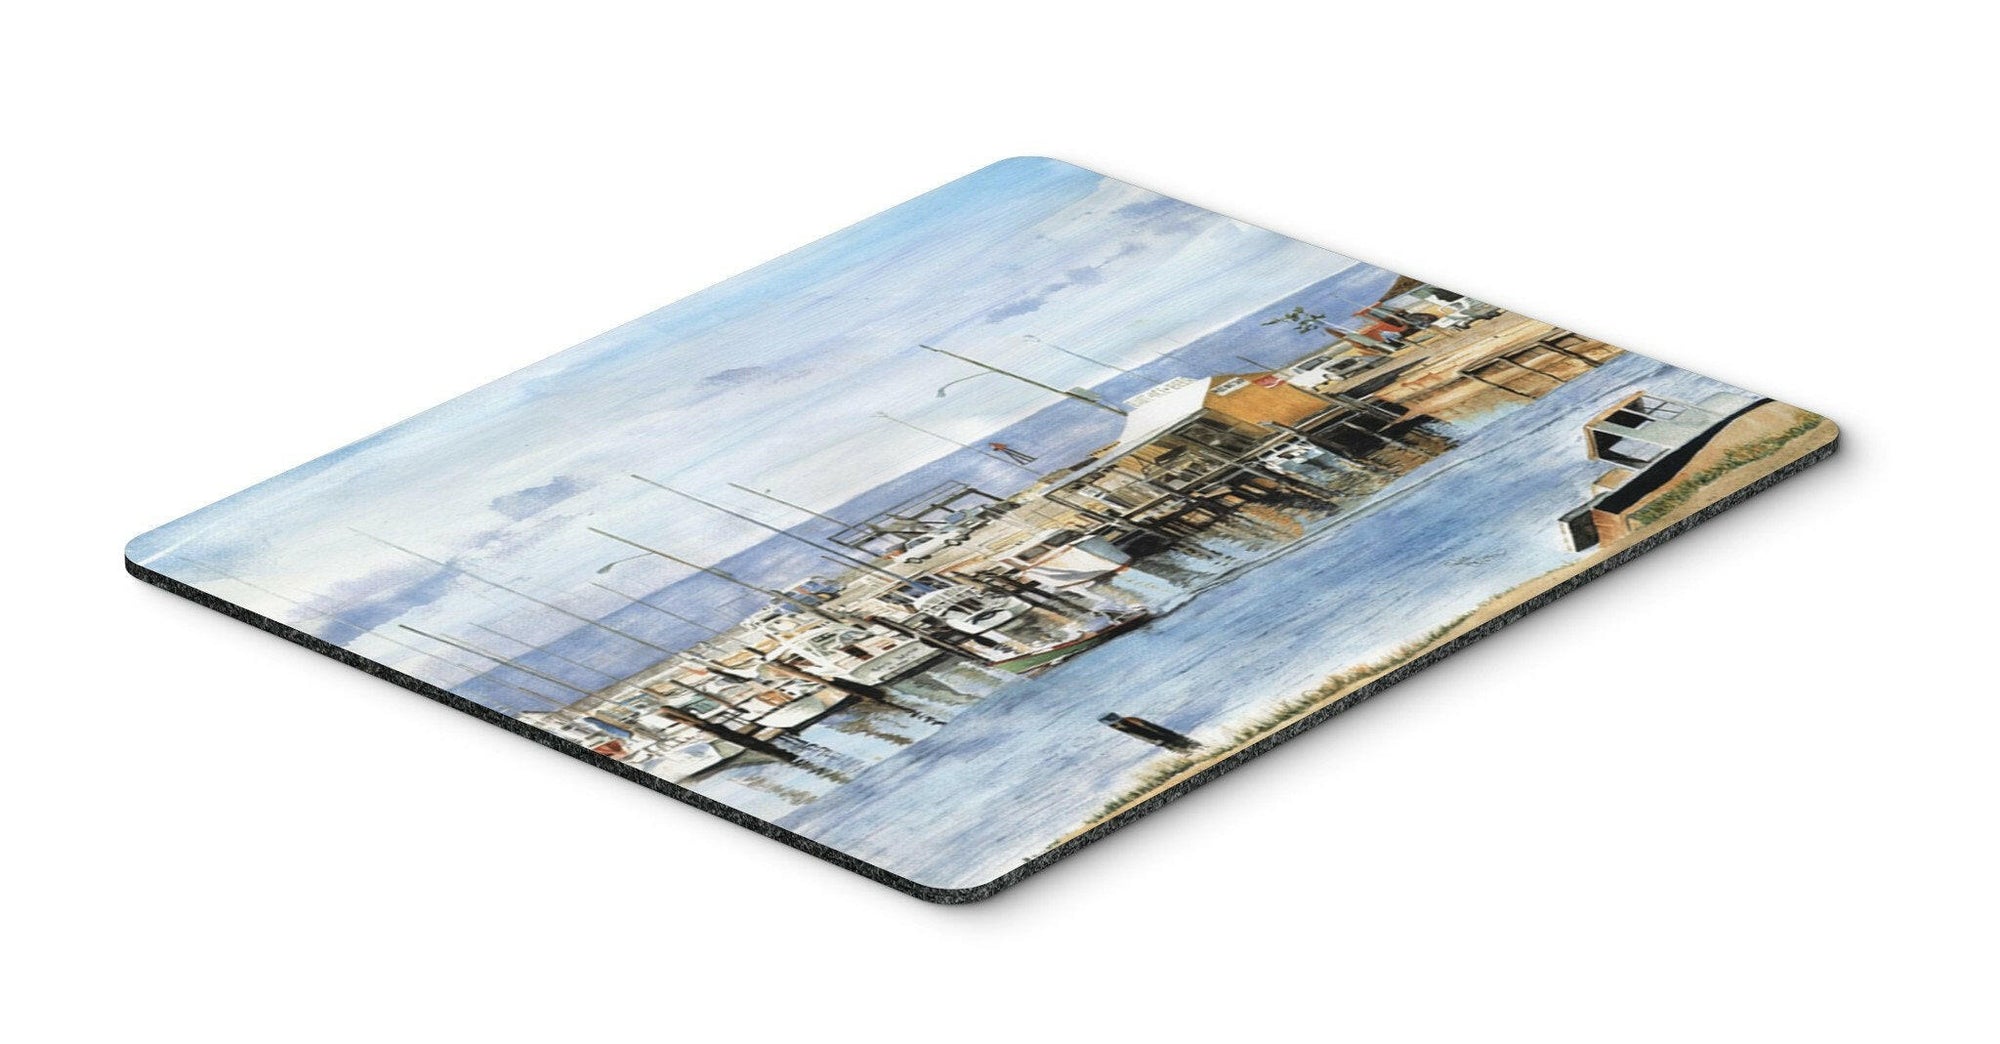 The Pass Bait Shop Mouse pad, hot pad, or trivet by Caroline's Treasures